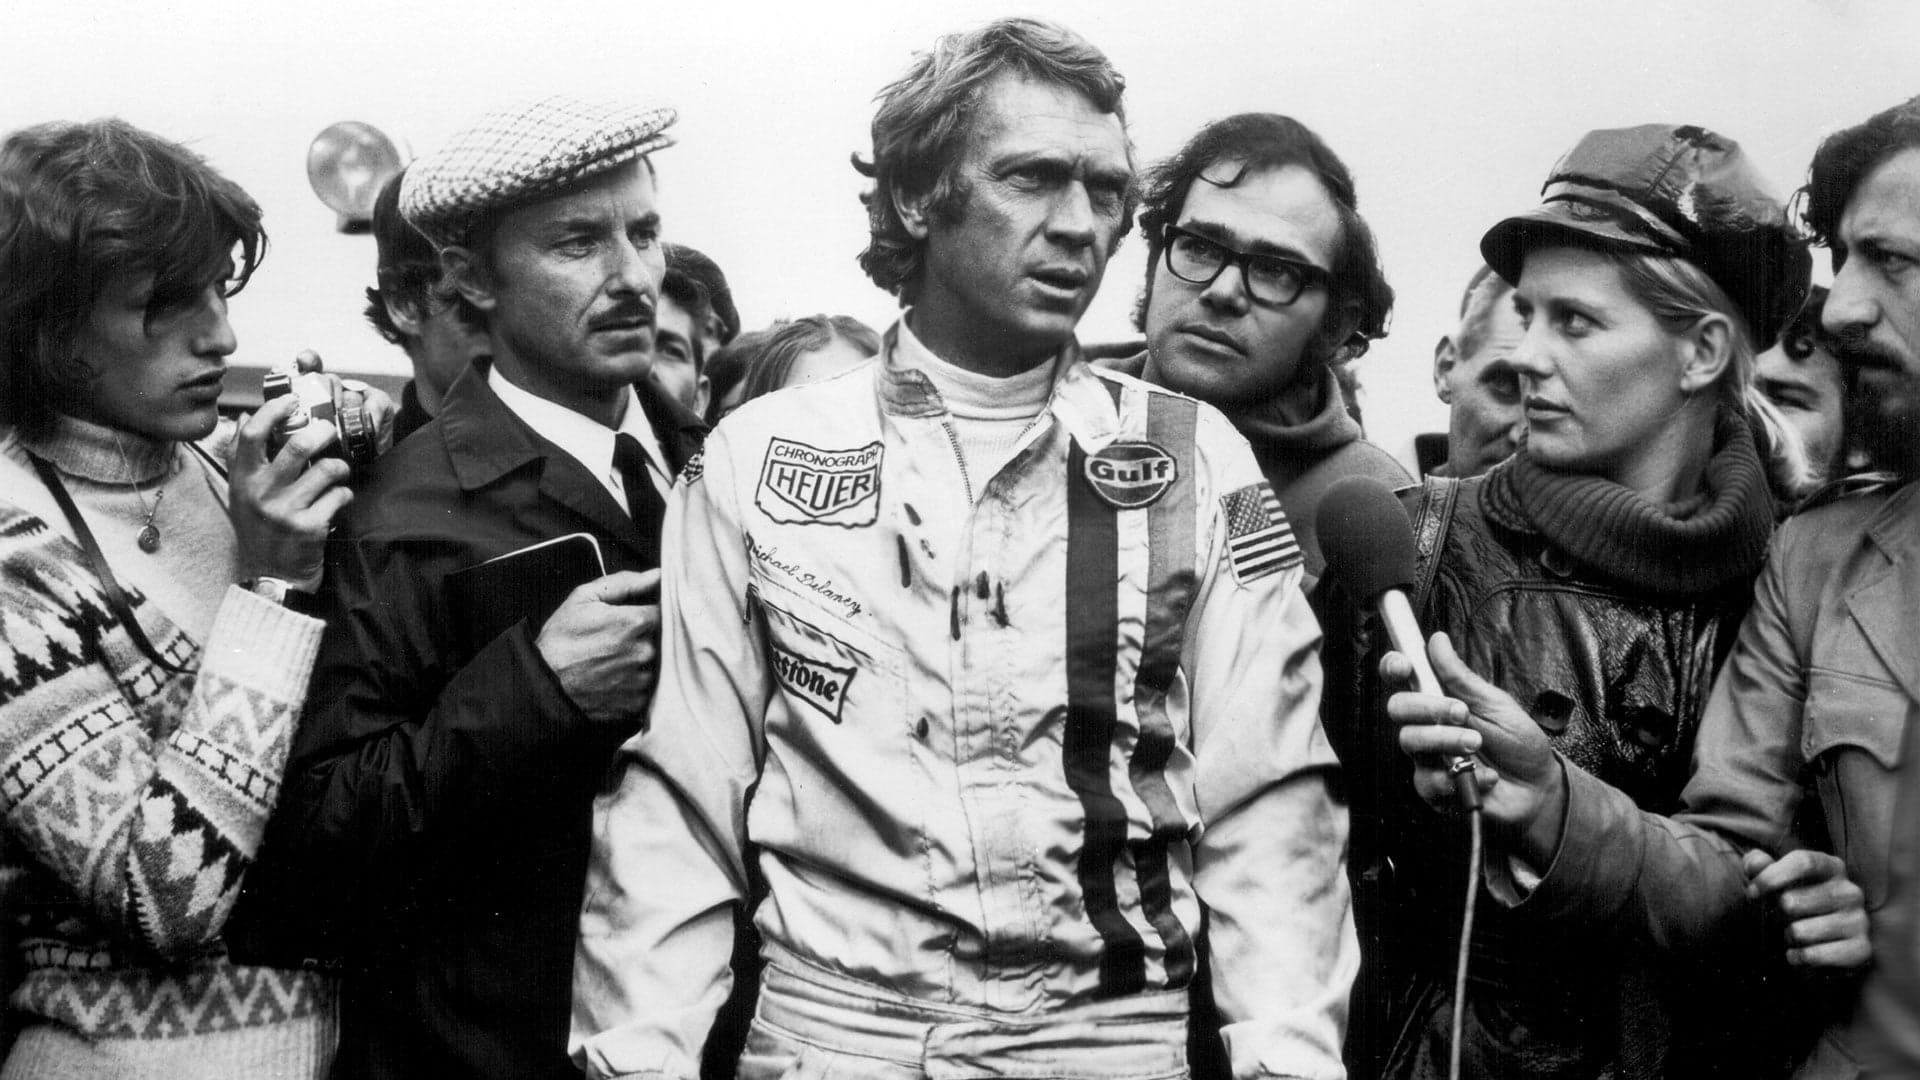 Steve McQueen’s Iconic Le Mans Racing Suit Is For Sale